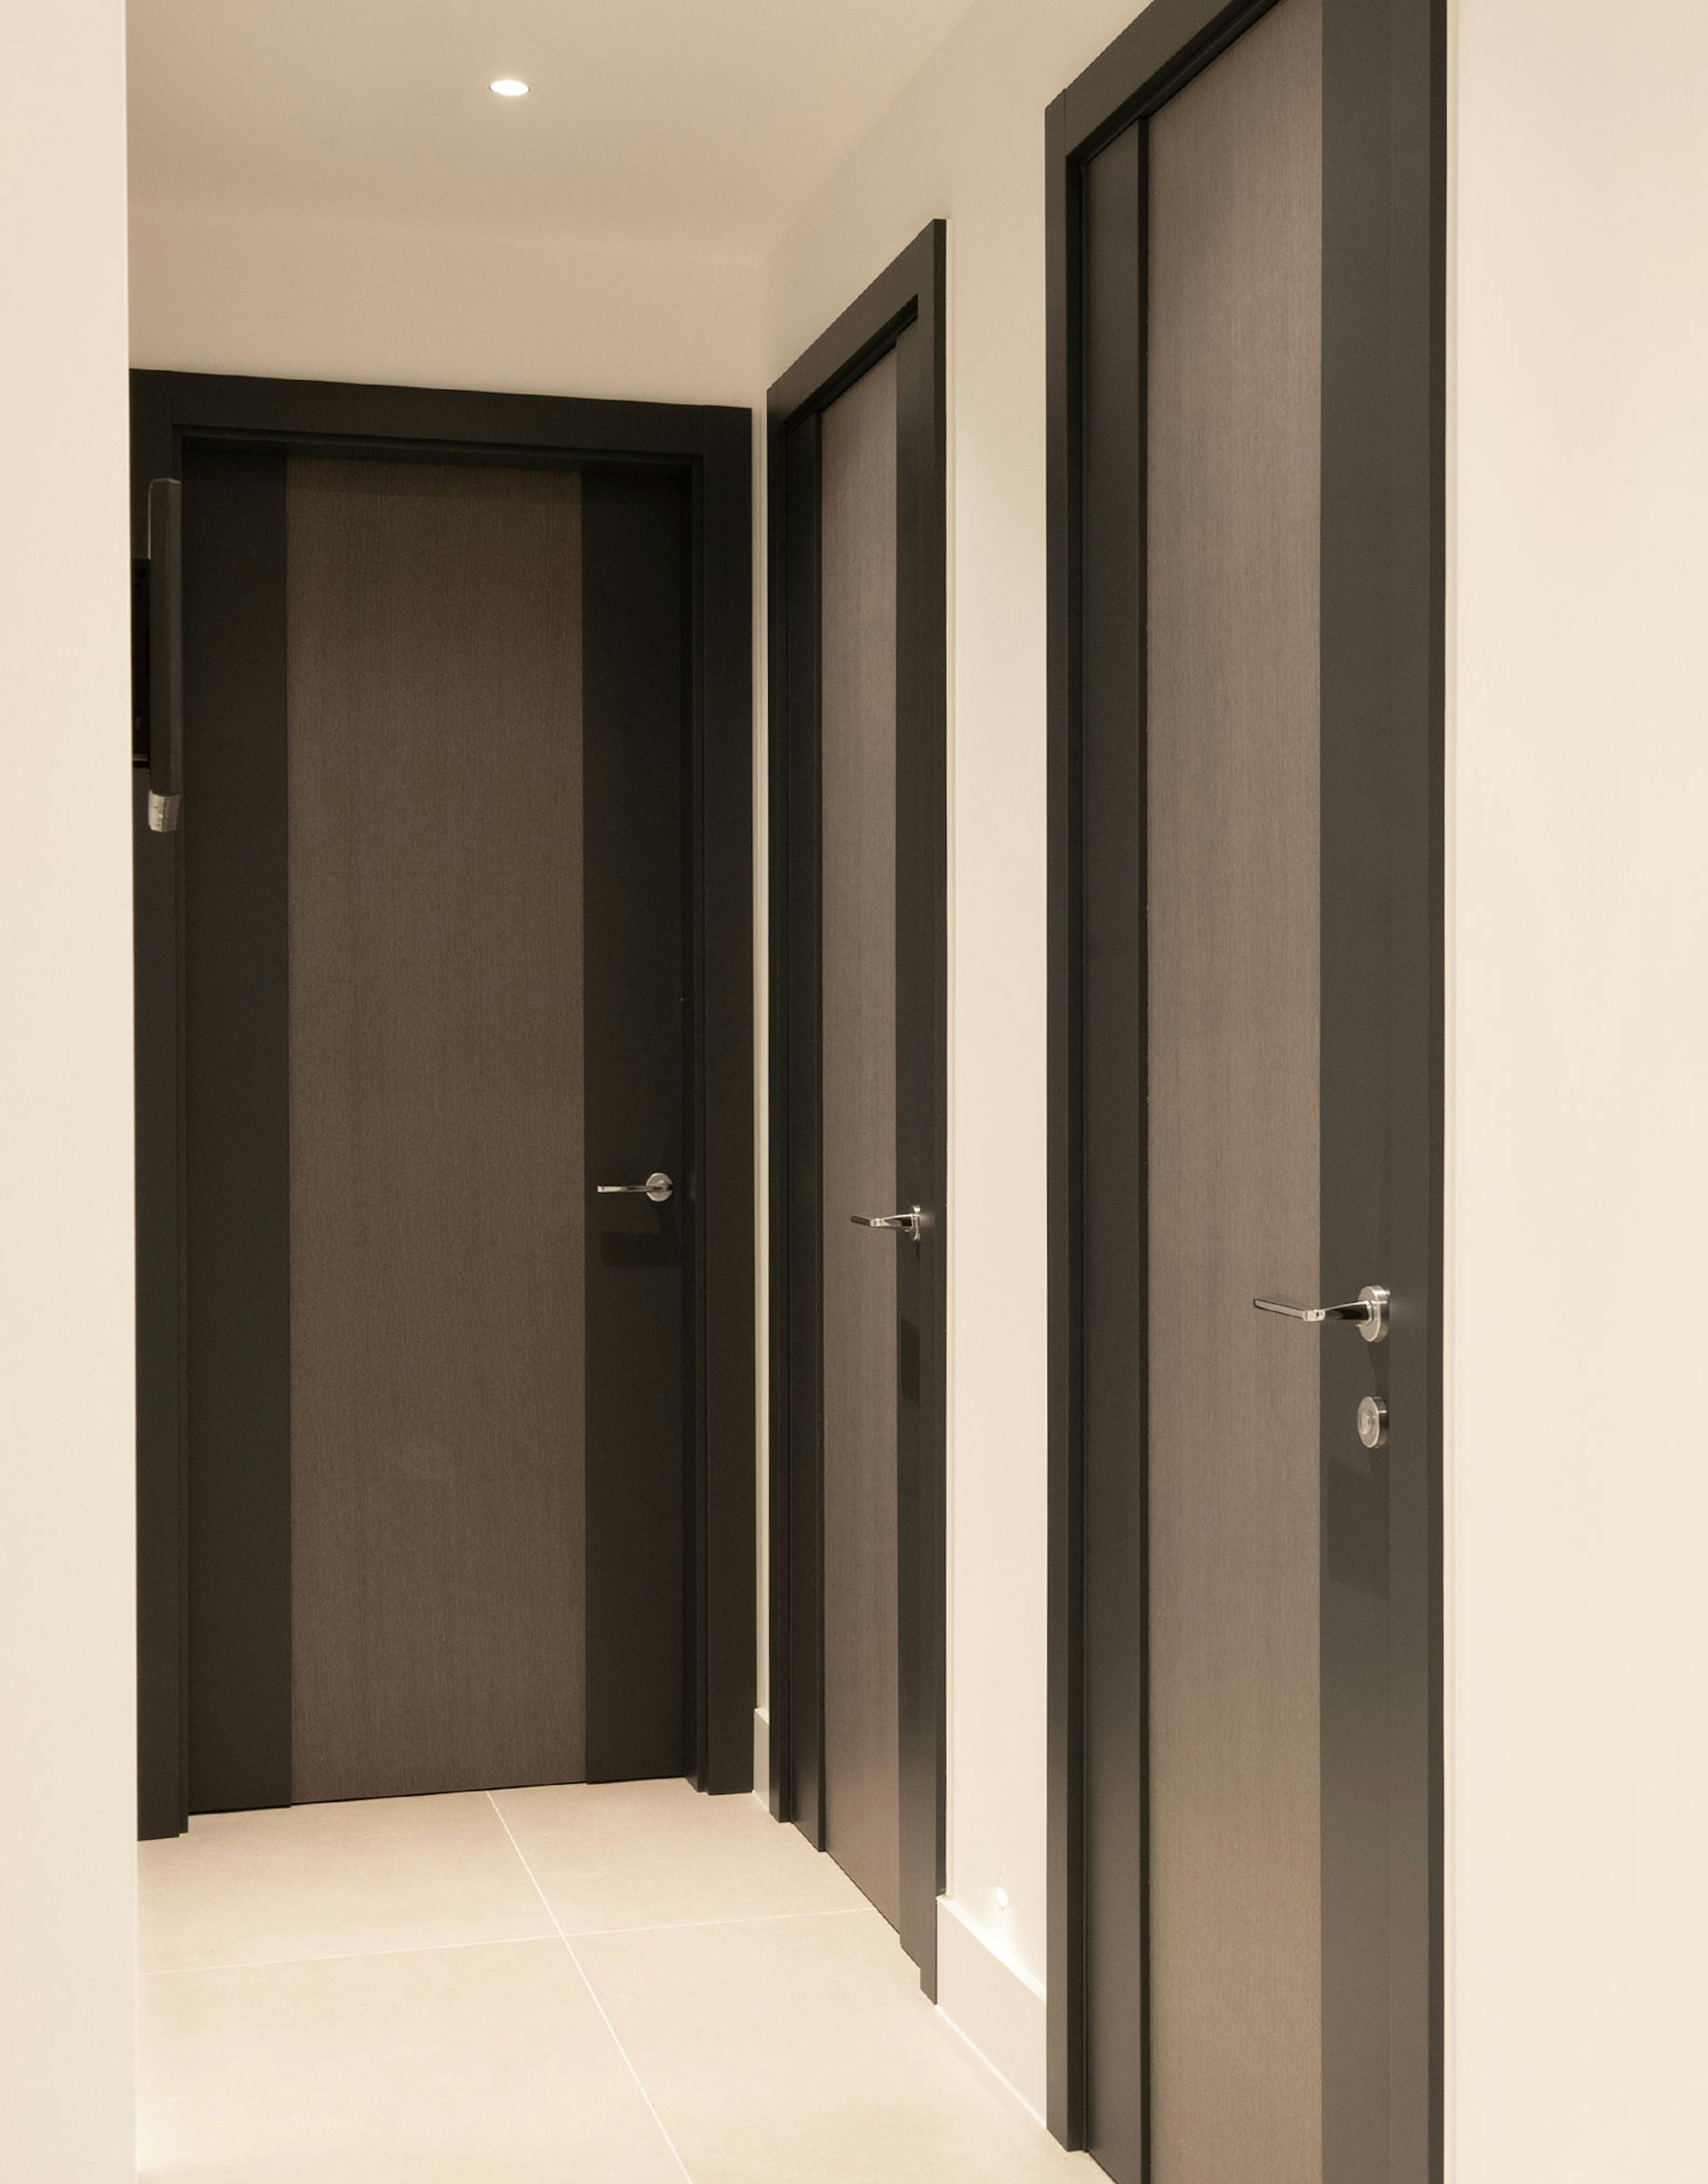 Contemporary corridor, with three Deuren made-to-measure internal doors - Linea style and dark grey painted finish.